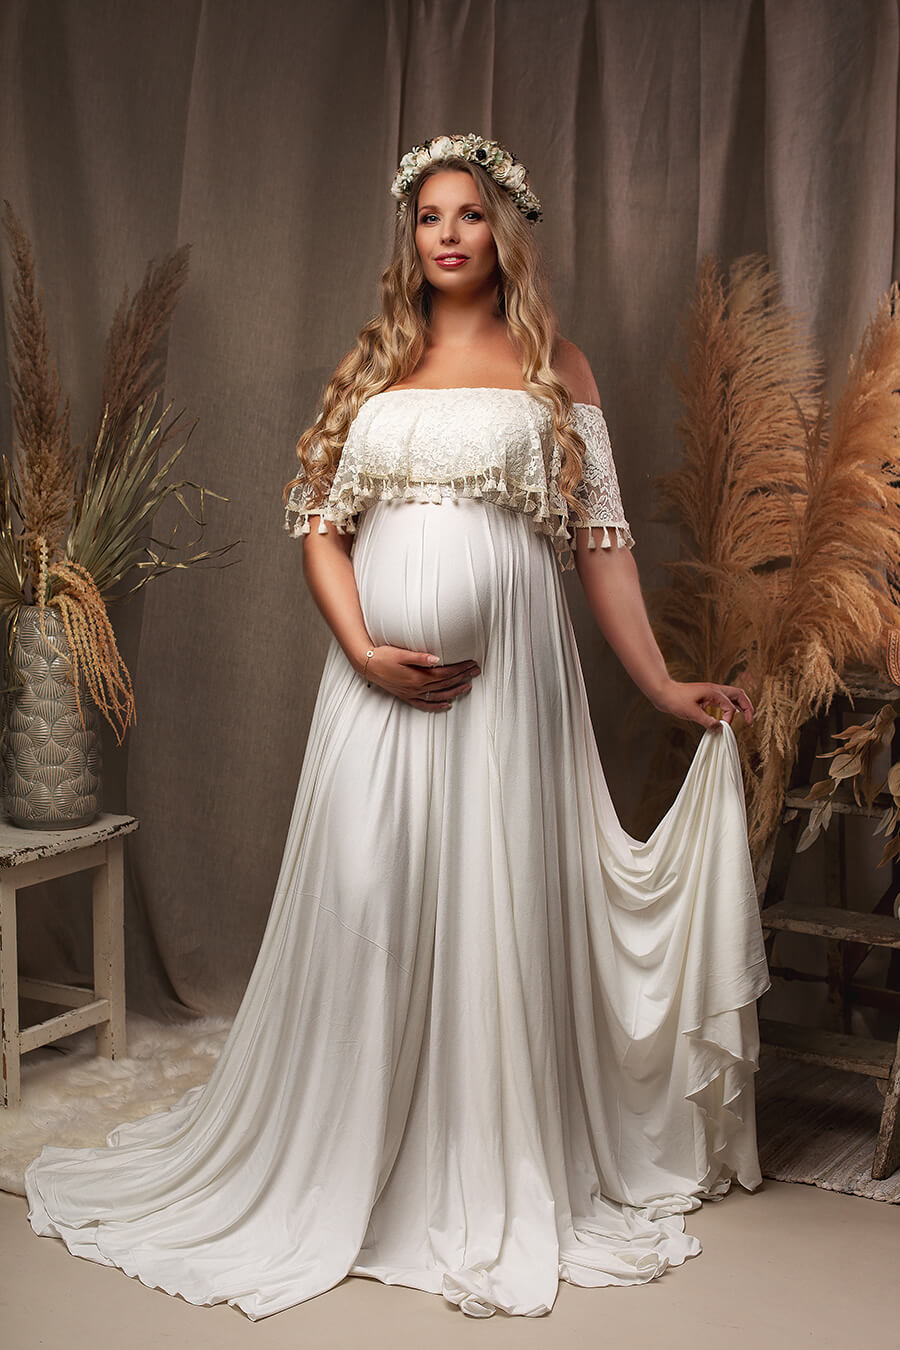 Blond pregnant model poses in a studio with the Boho Catania Maternity Dress with a flower gown. The photo shows the whole dress - a strapless top with a long circle skirt. The model faces the camera and holds her bump with one hand and the skirt with the other. The top is made of bridal lace with brocante details at the ending.